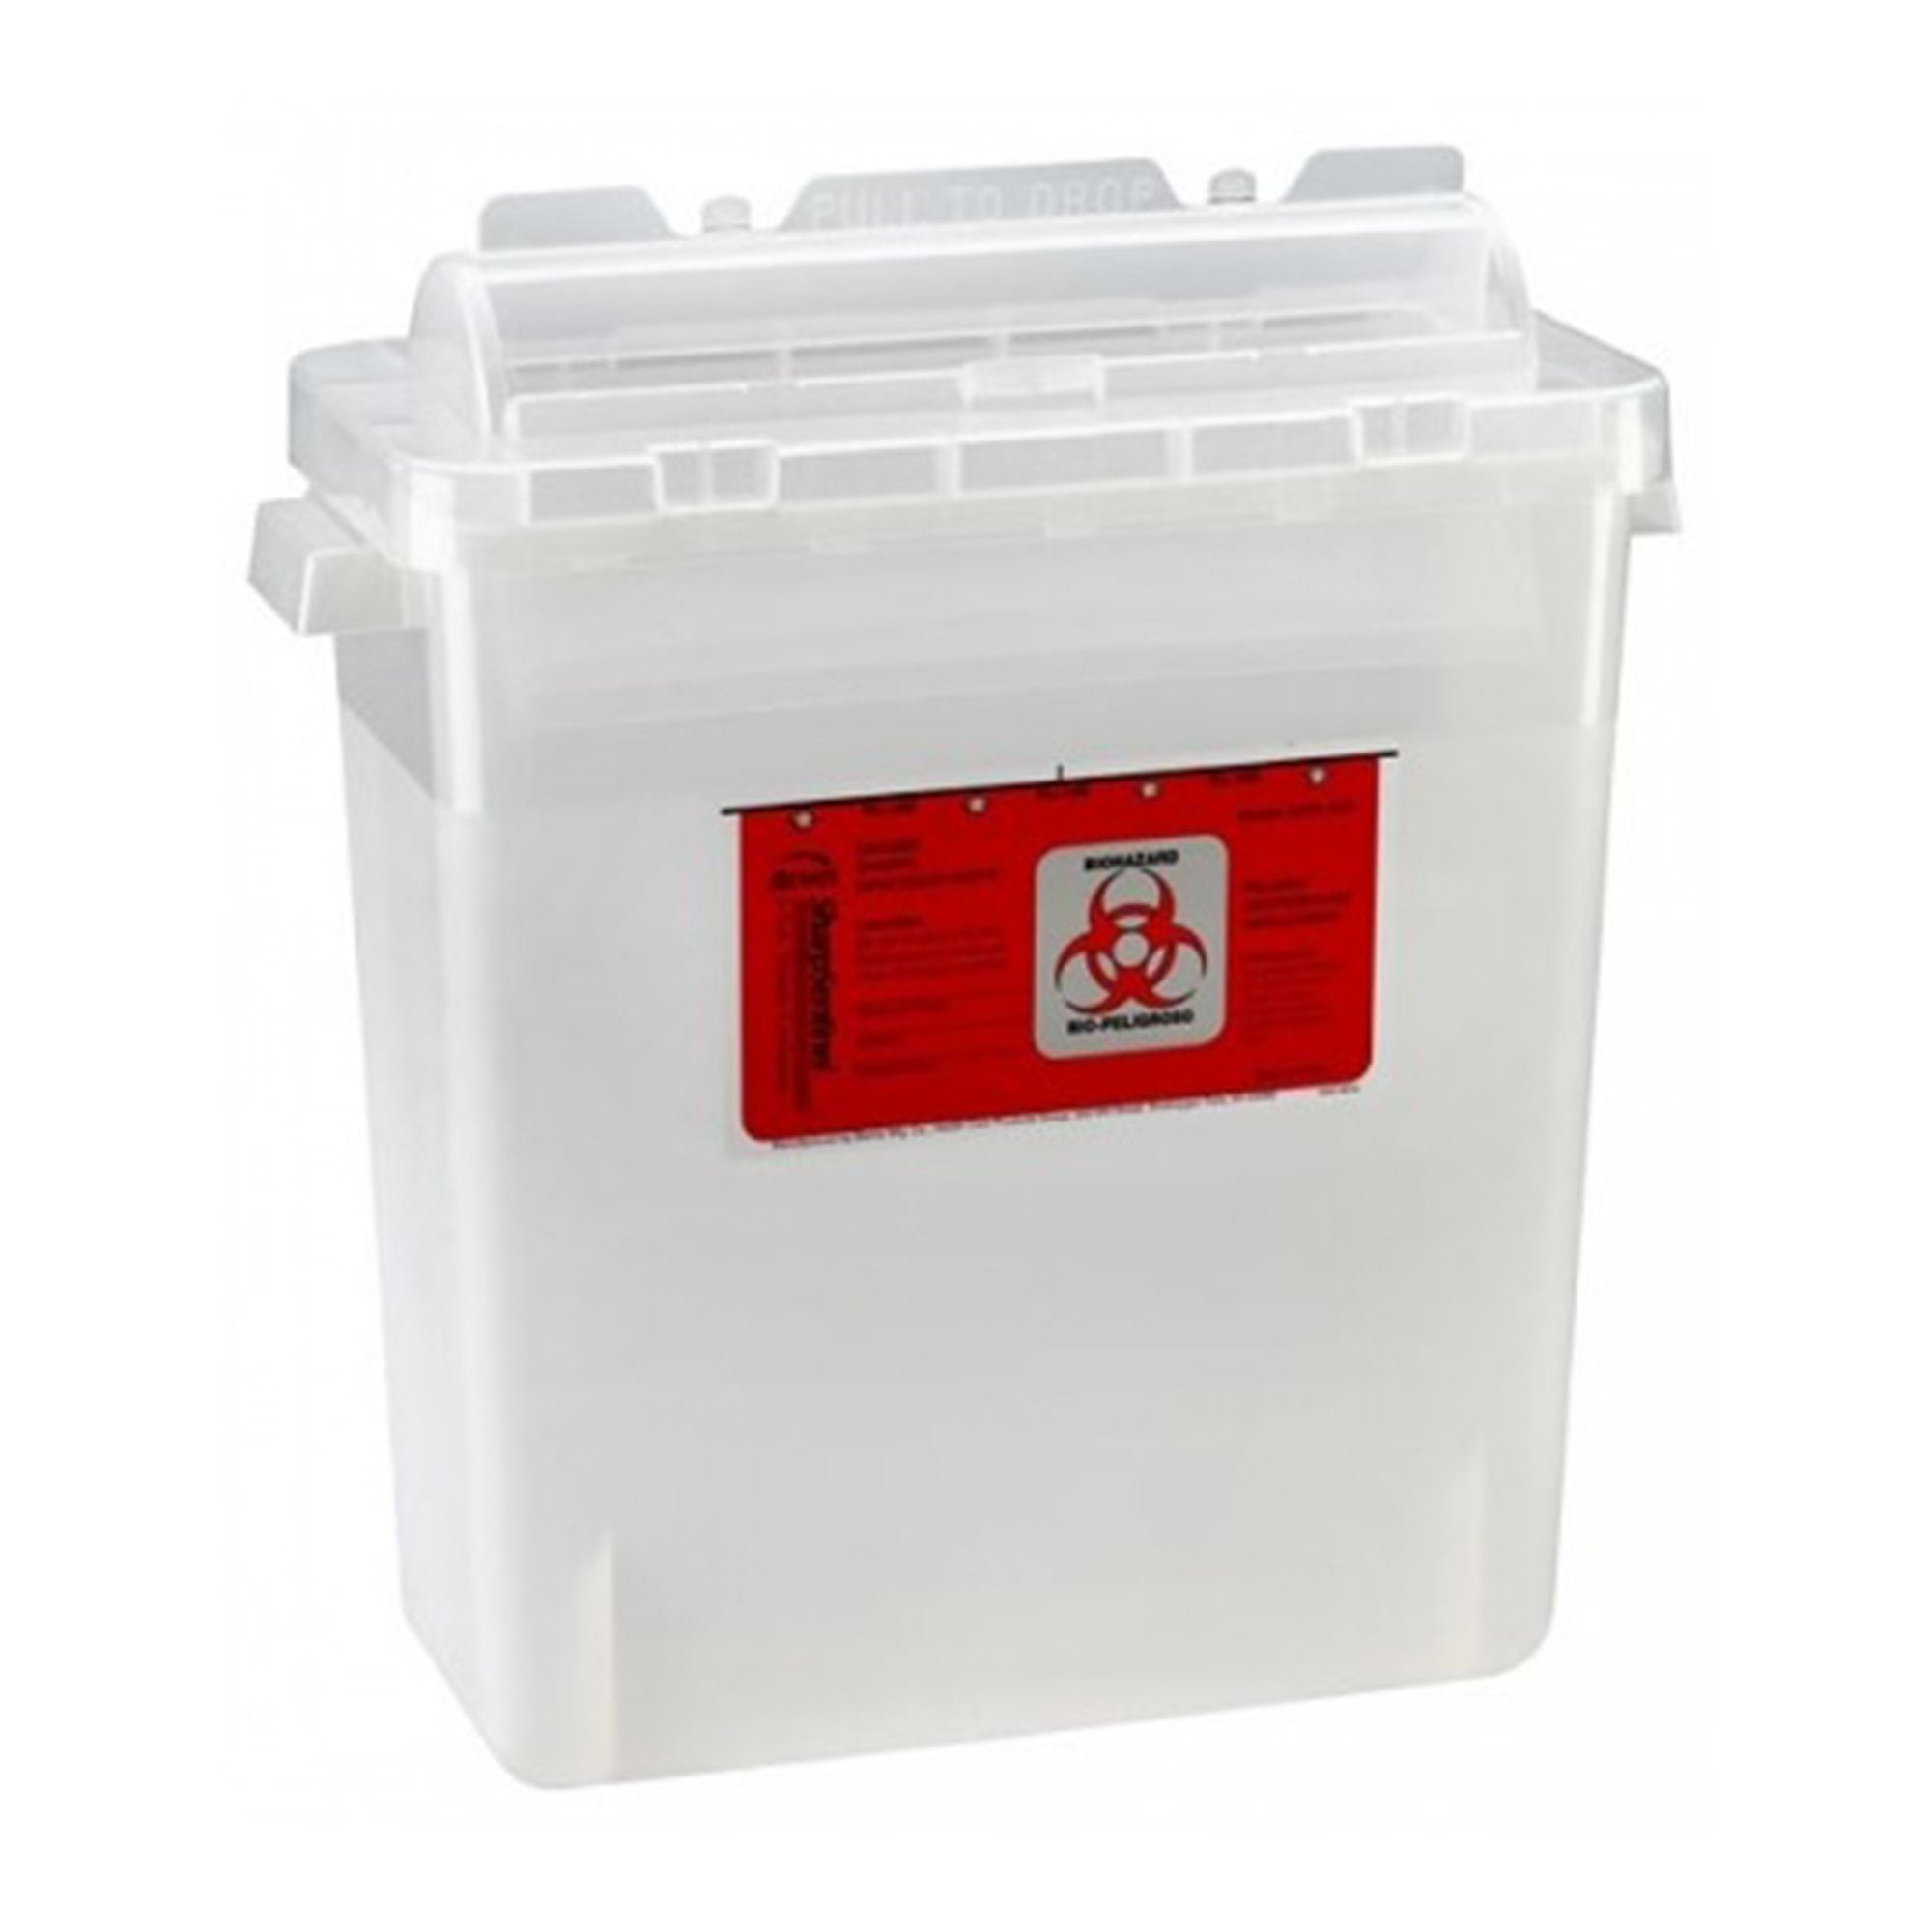 Sharps Container Bemis™ Sentinel Translucent Base 10 H X 5-1/4 W X 11 D Inch Horizontal Entry 1.25 Gallon